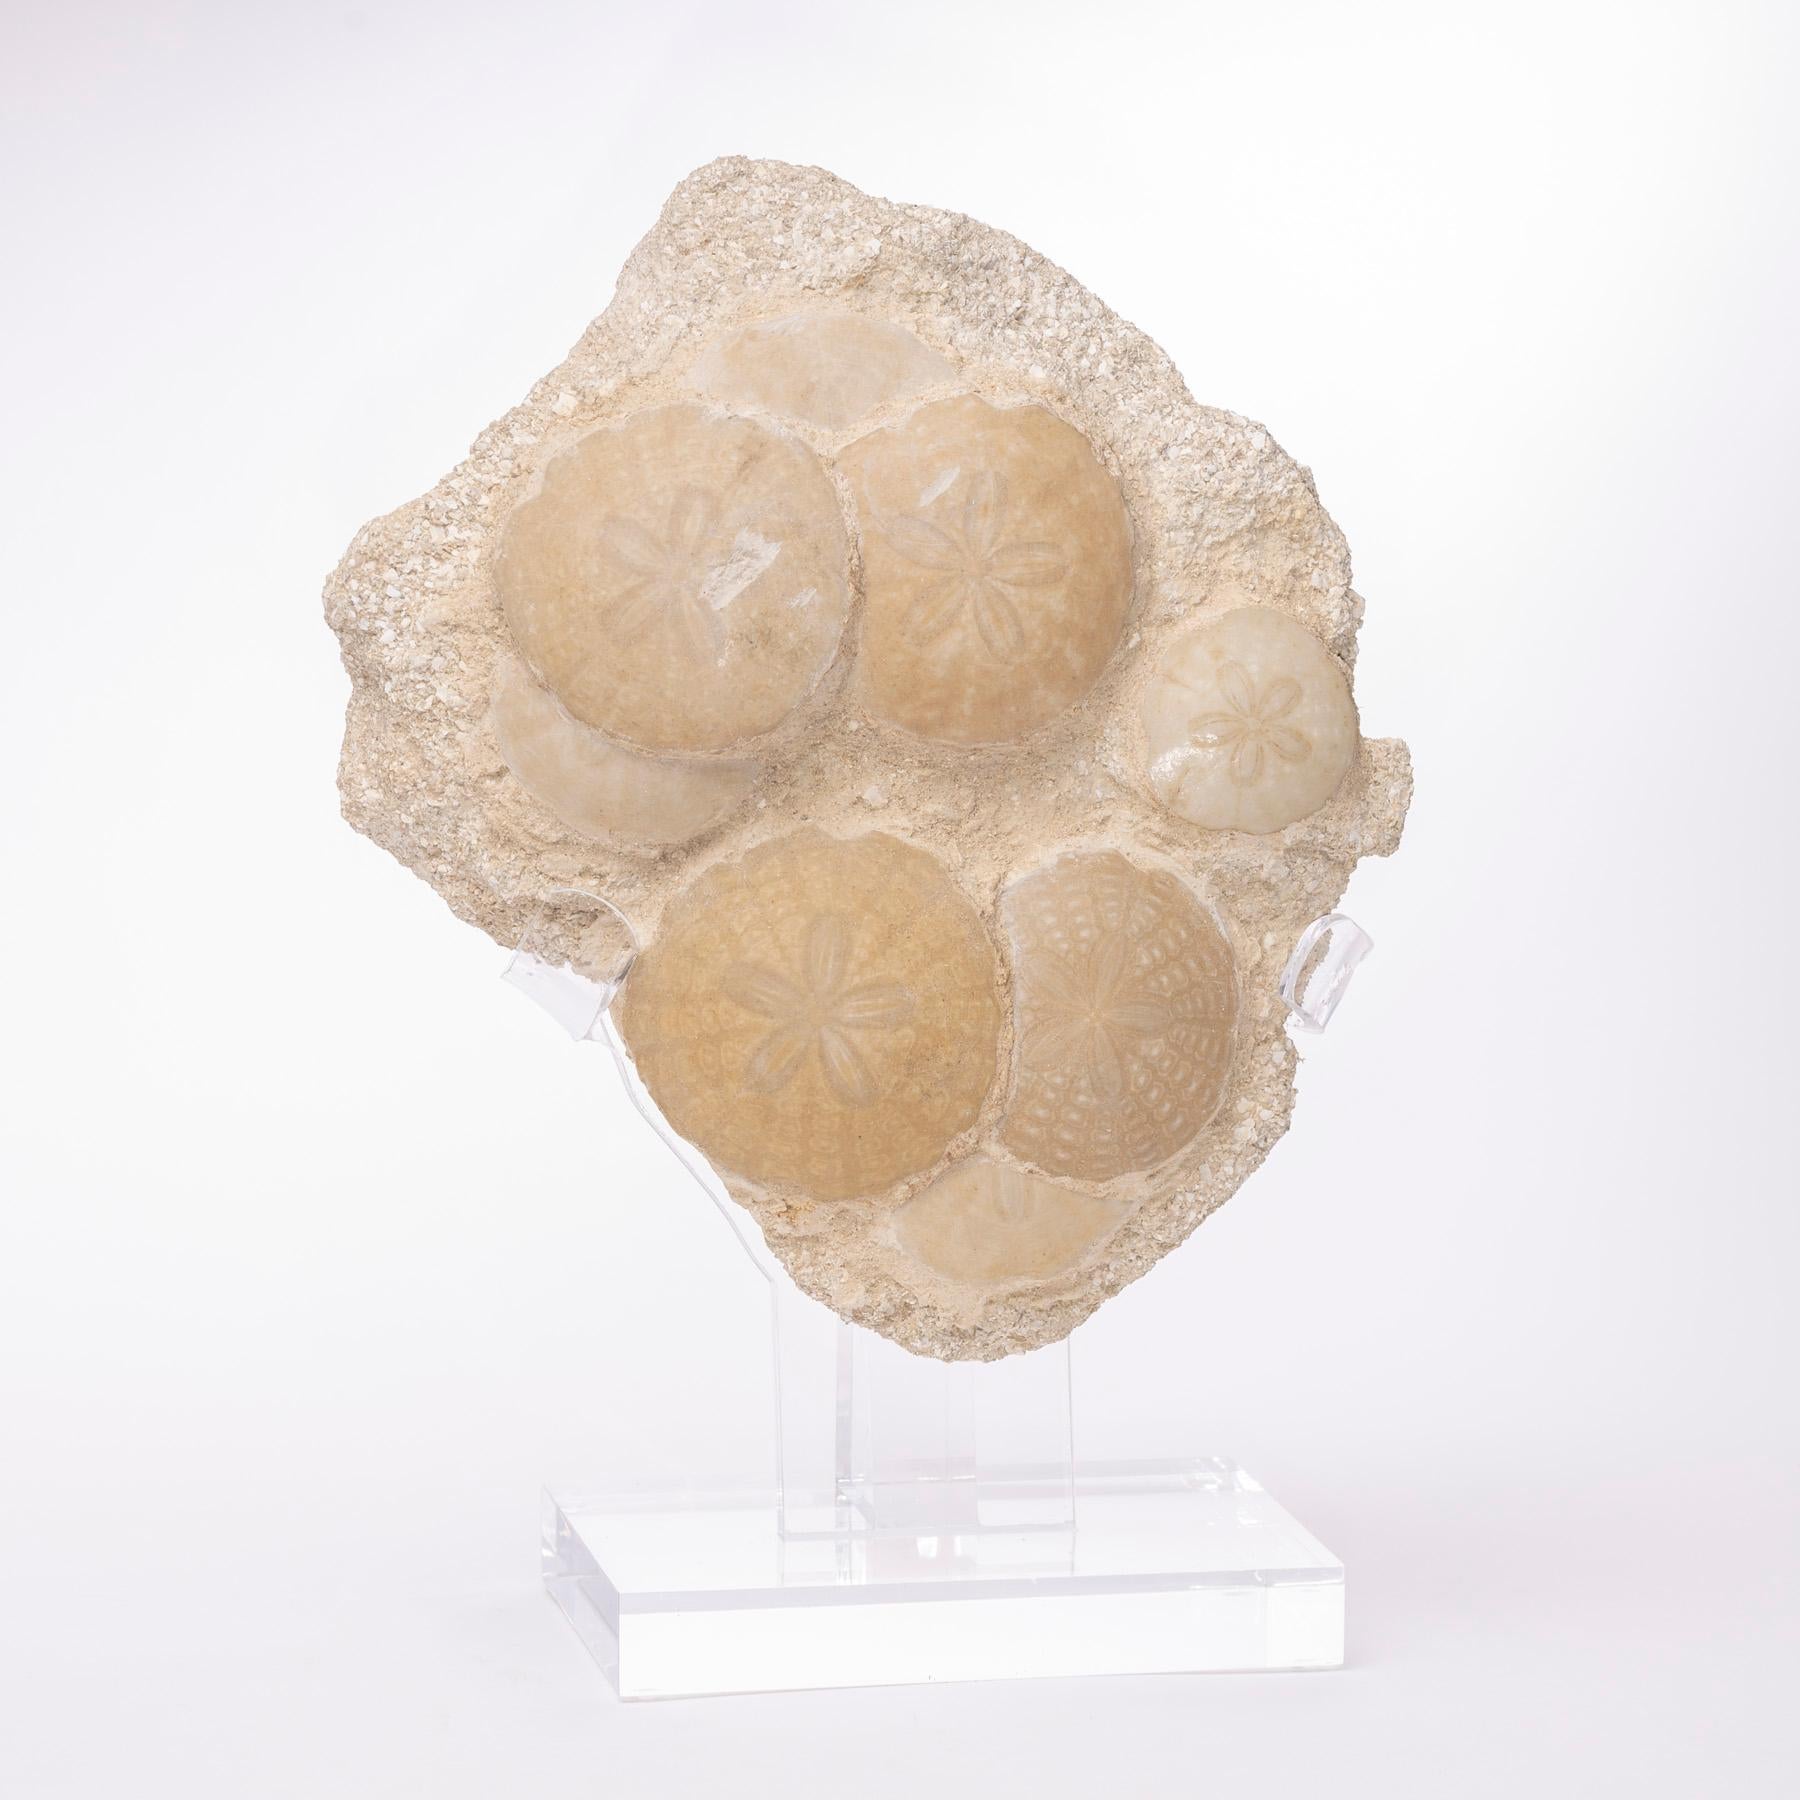 Spectacular specimen with 12 fossil sand dollars of the species Amphiope bioculata. 
It´s origin is from D'Angers Region, France 
Period: Early Miocene (23 million years old).
 